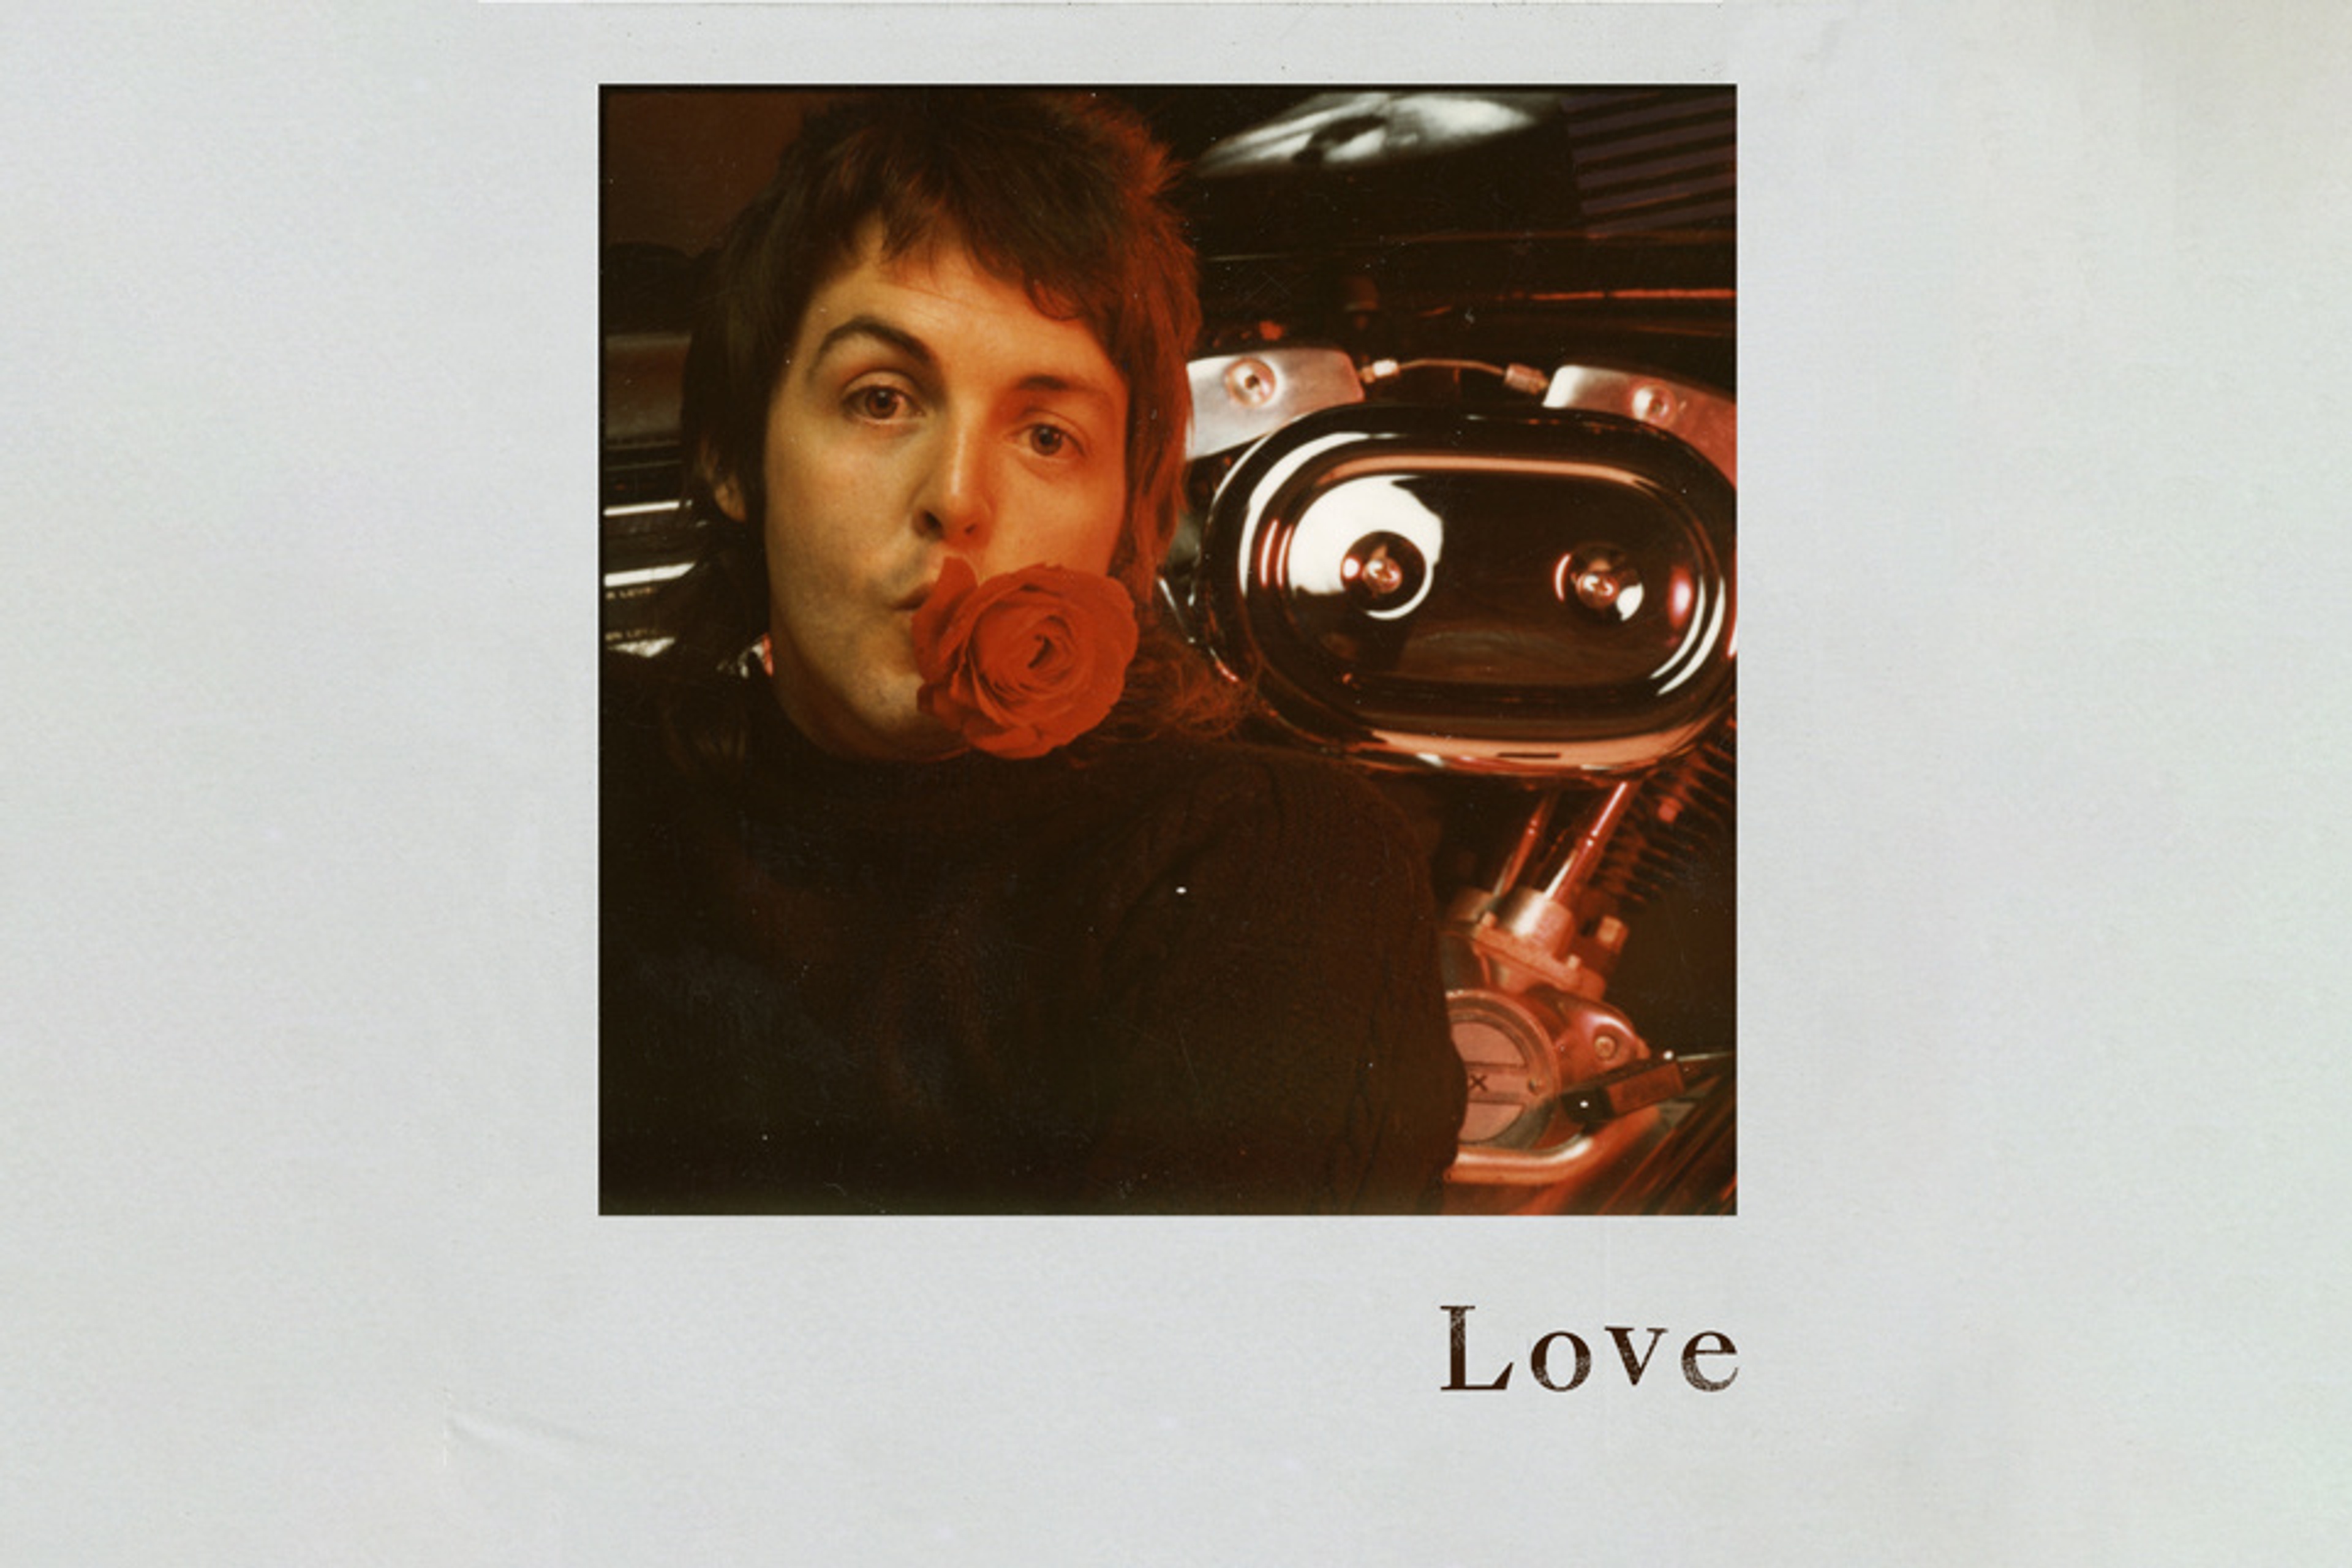 Photo of 'Love' EP artwork which includes a portrait of Paul with a rose in his mouth.